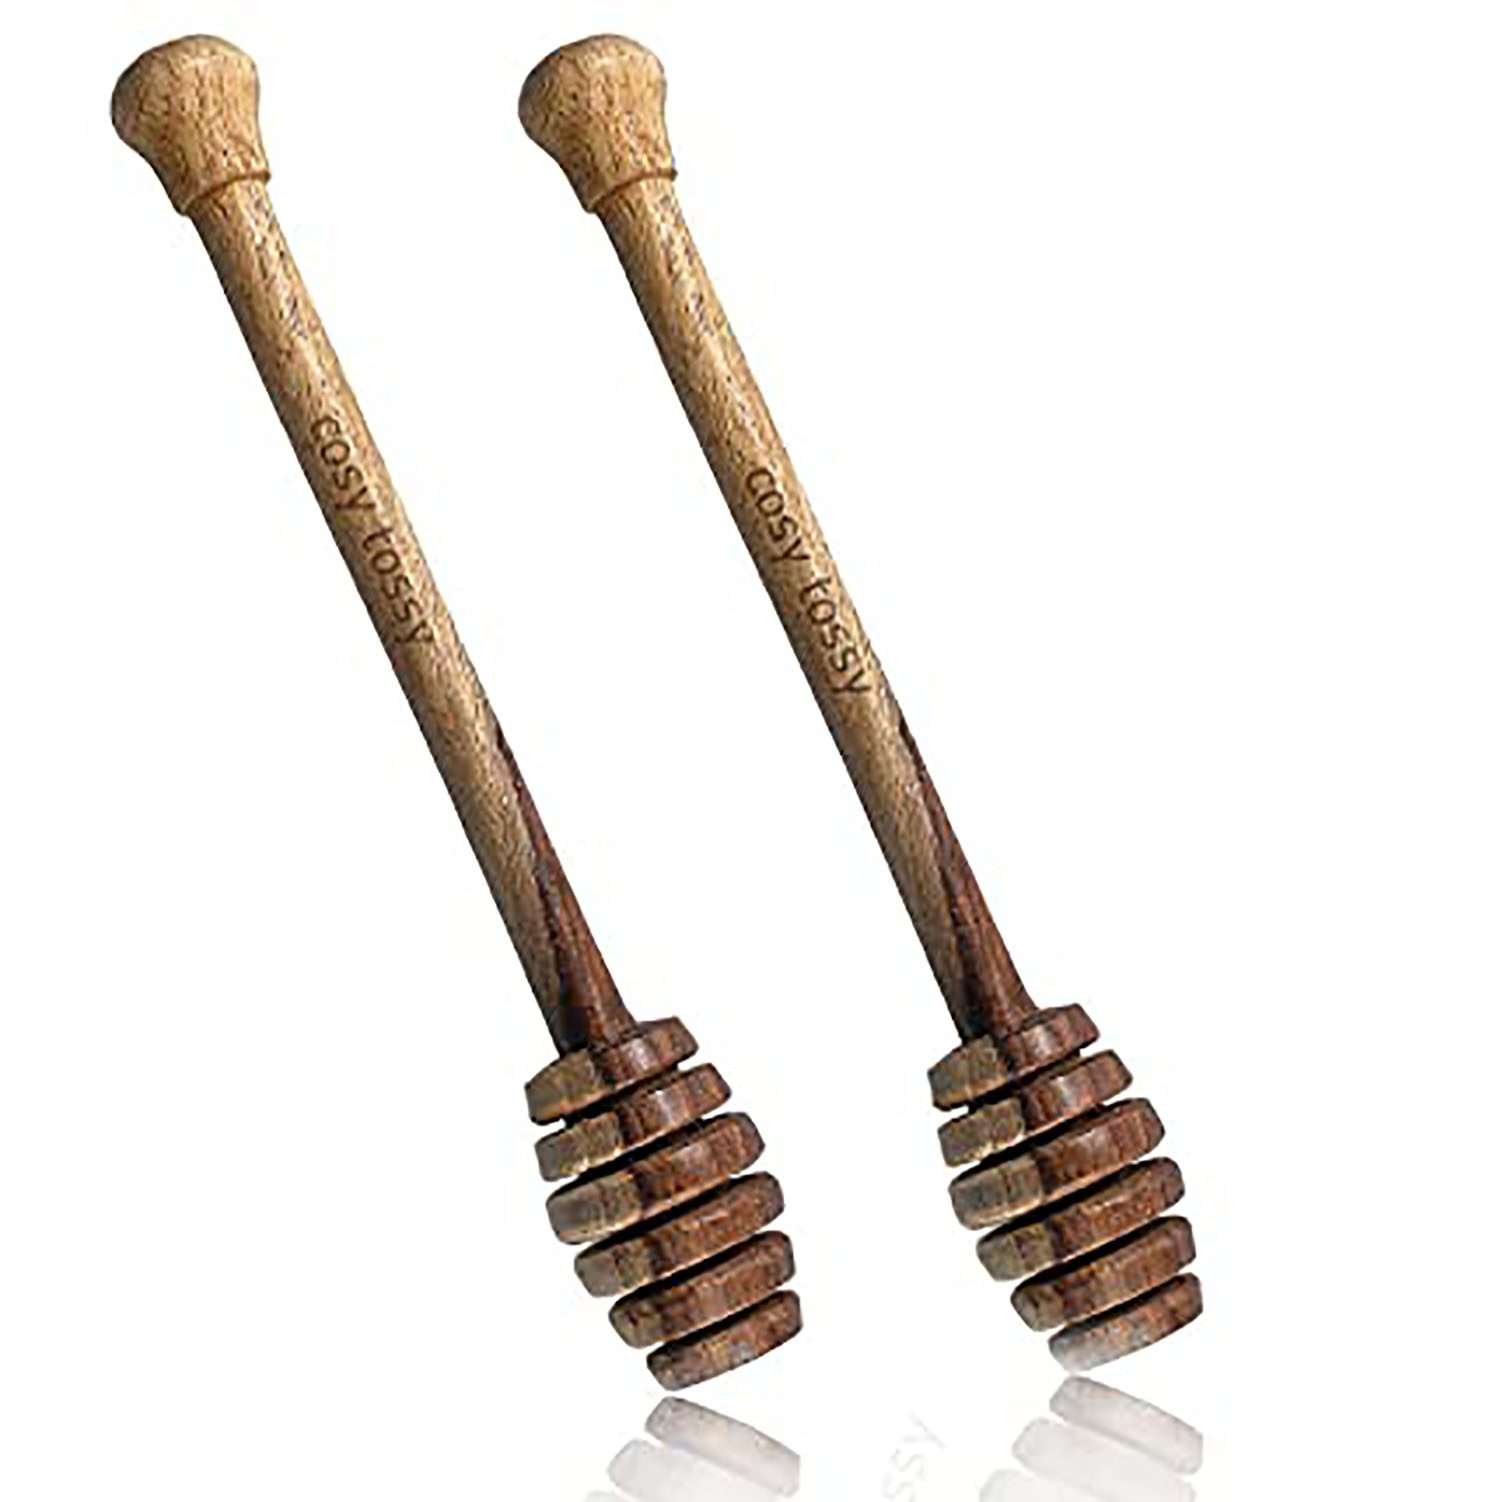 Long Handcrafted Wooden Honey Dipper Stick – Pack of 2 | Natural Look